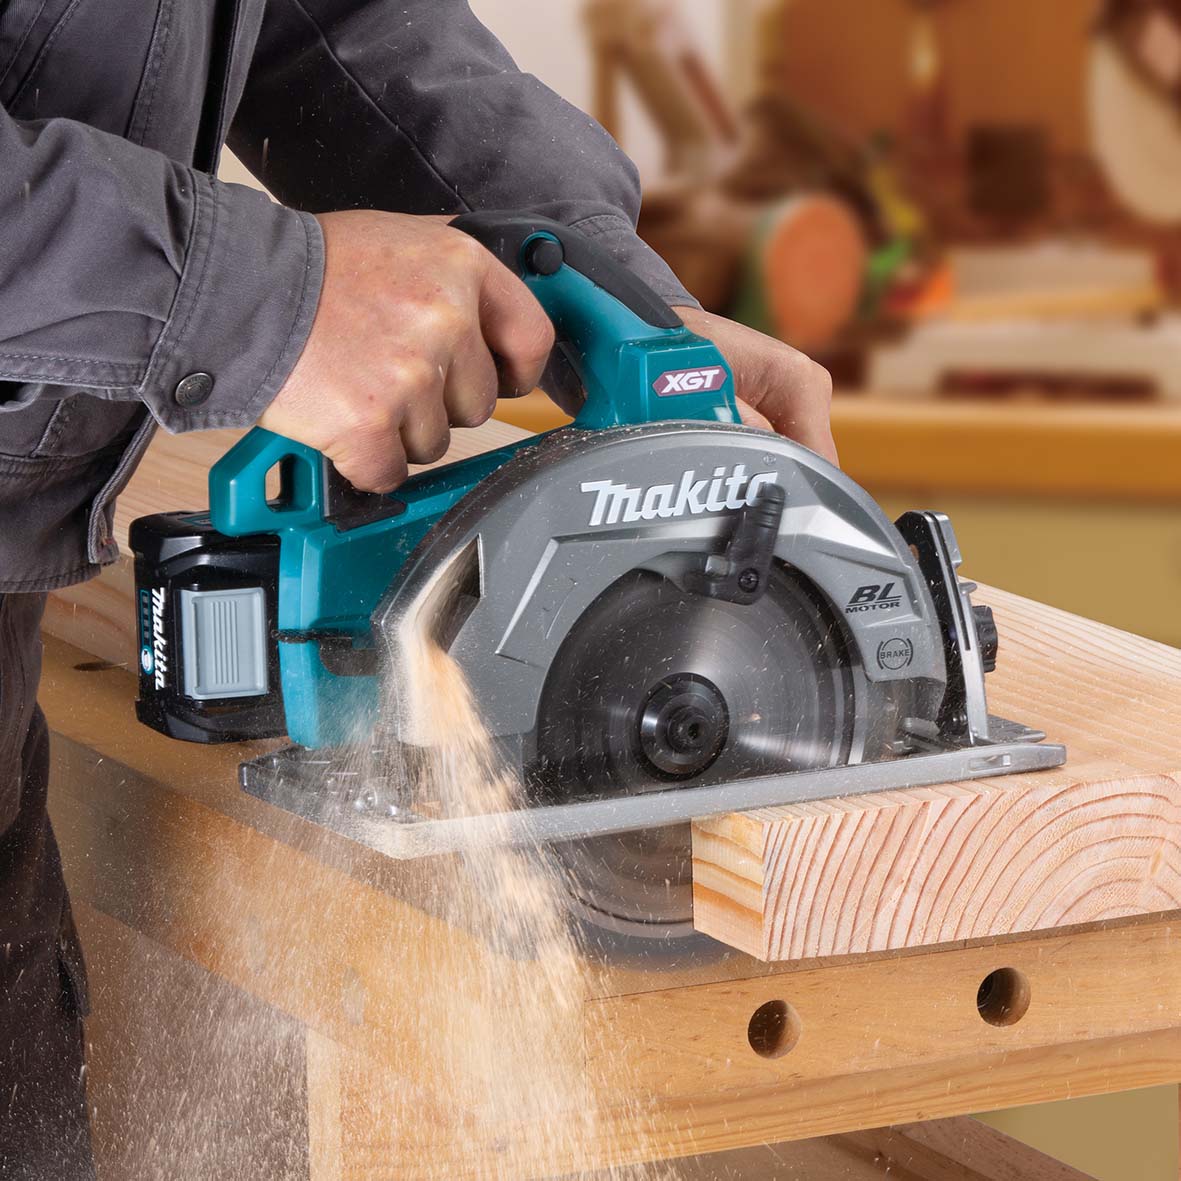 40V 185mm (7-1/4") Brushless AWS* Circular Saw Bare (Tool Only) HS003GZ by Makita